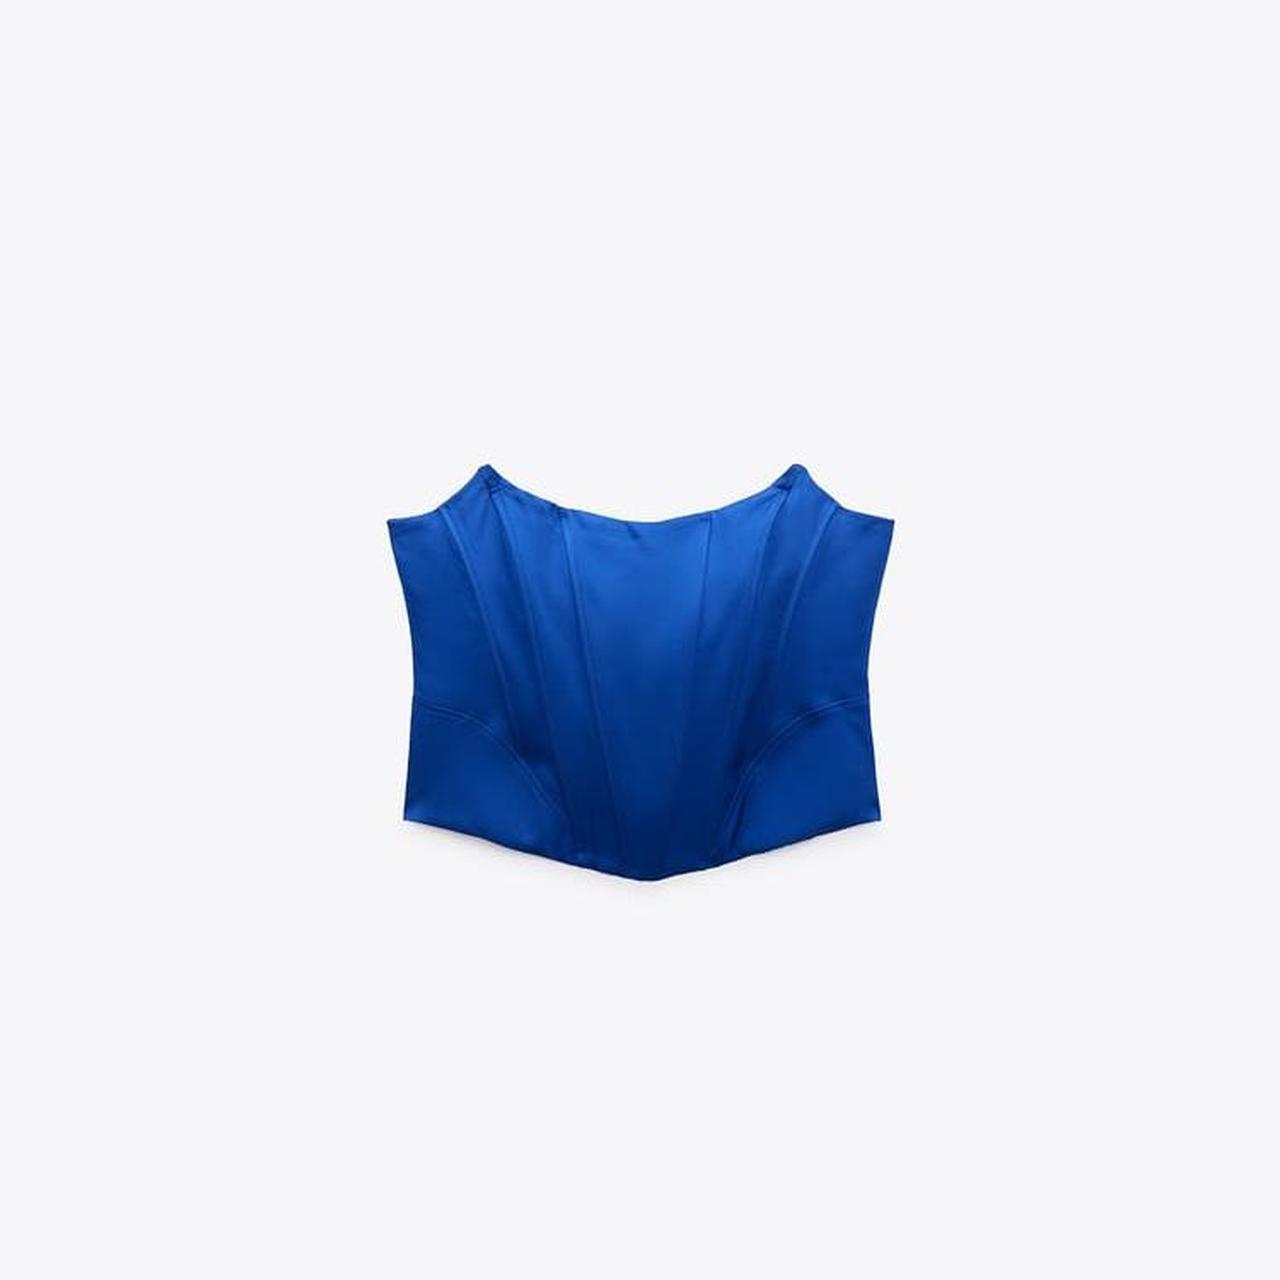 Corset SATIN CORSETRY-INSPIRED TOP Top with a - Depop